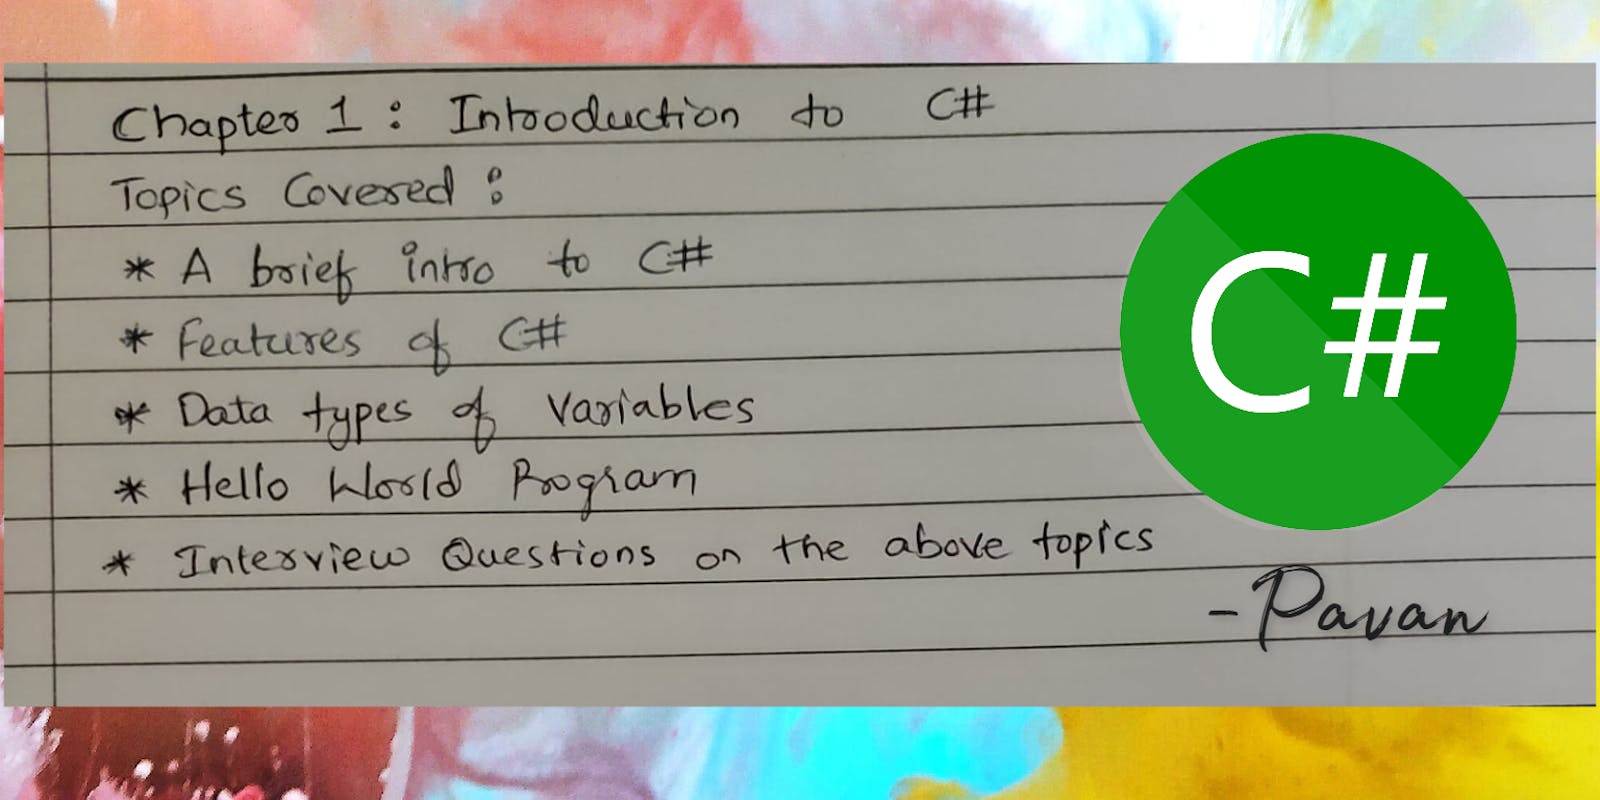 Chapter 1: Introduction to C#